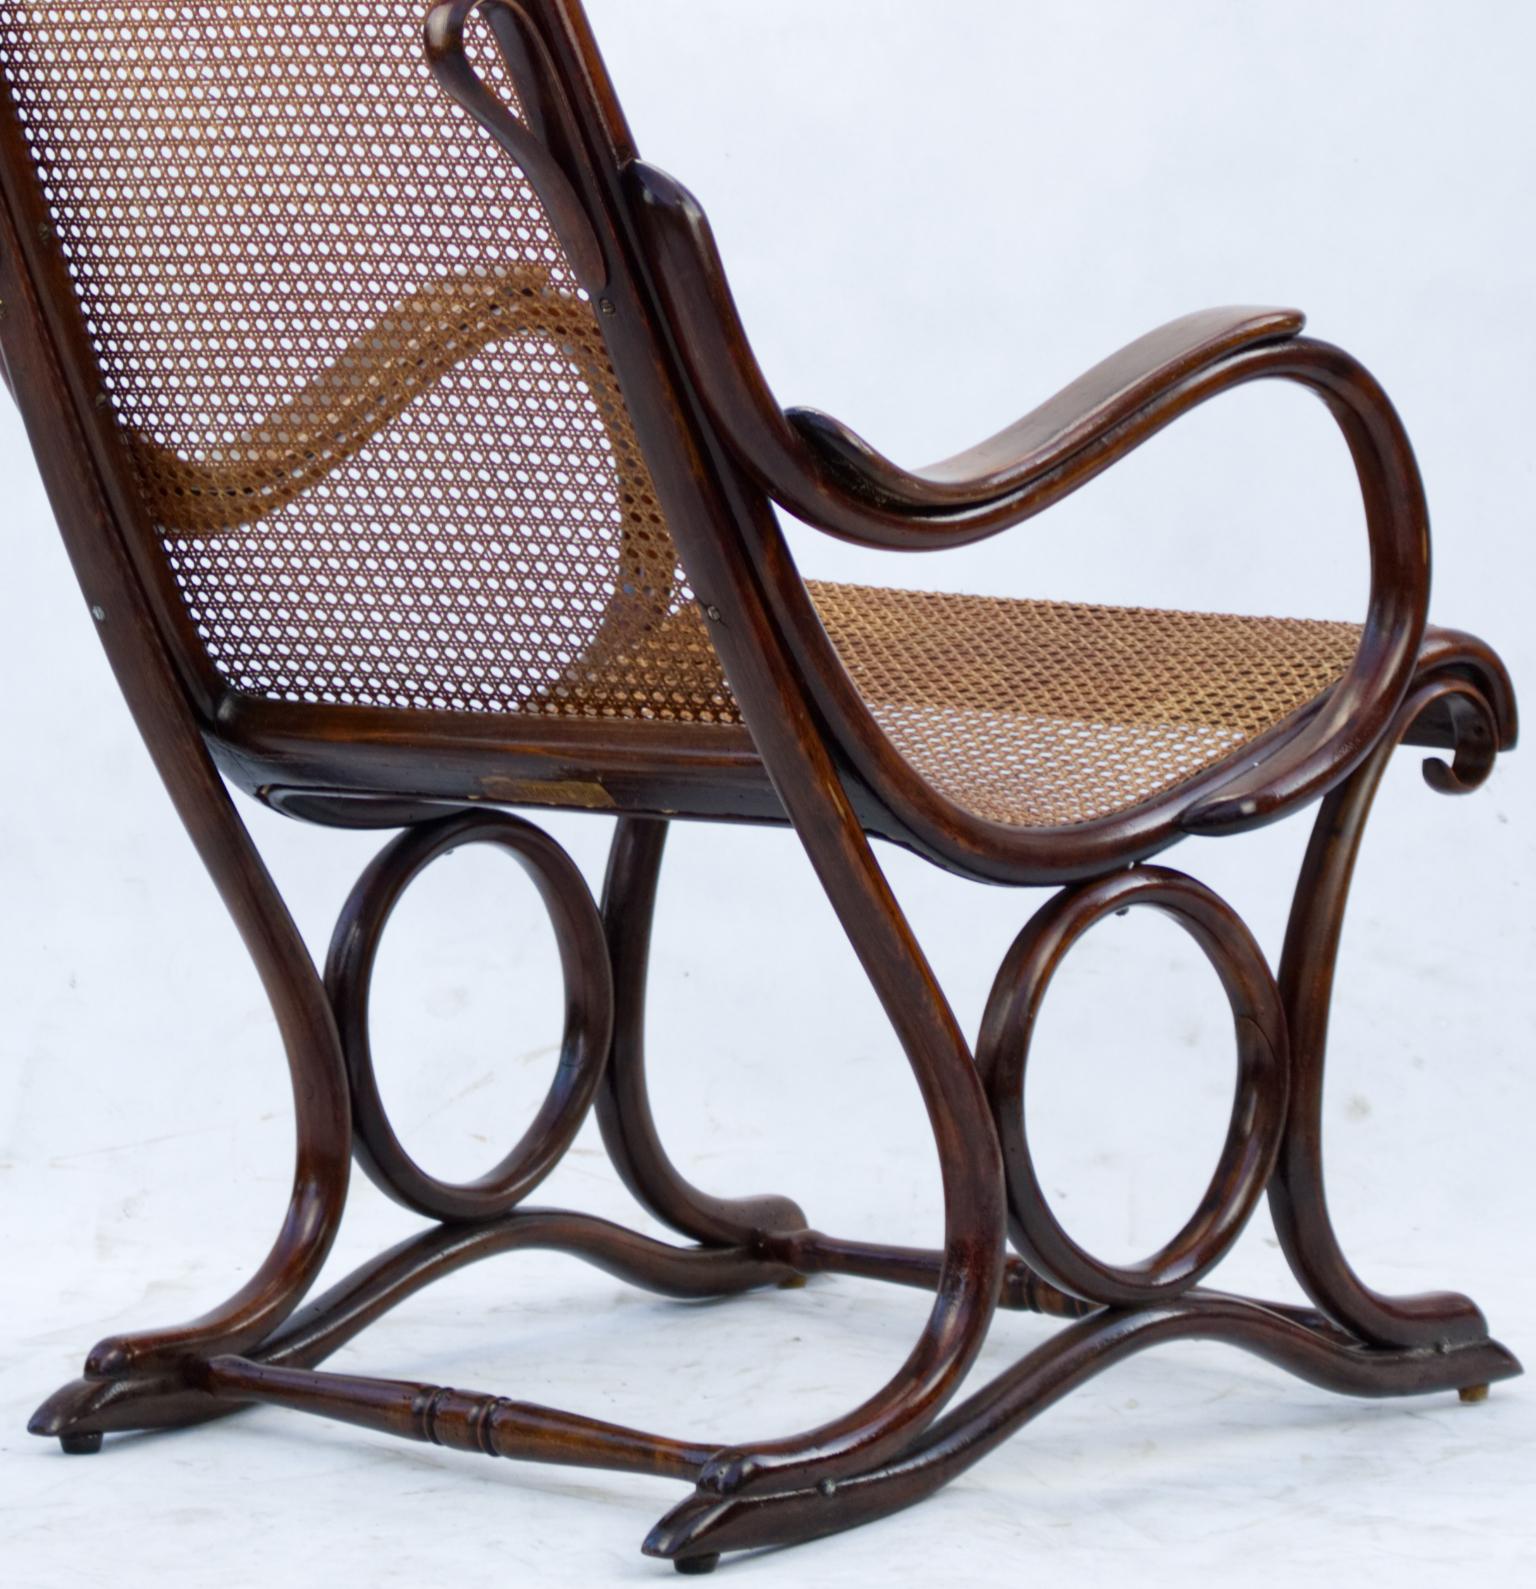 Bentwood Cane Salonfauteuil Easy Chair Thonet No. 1, circa 1890 For Sale 4